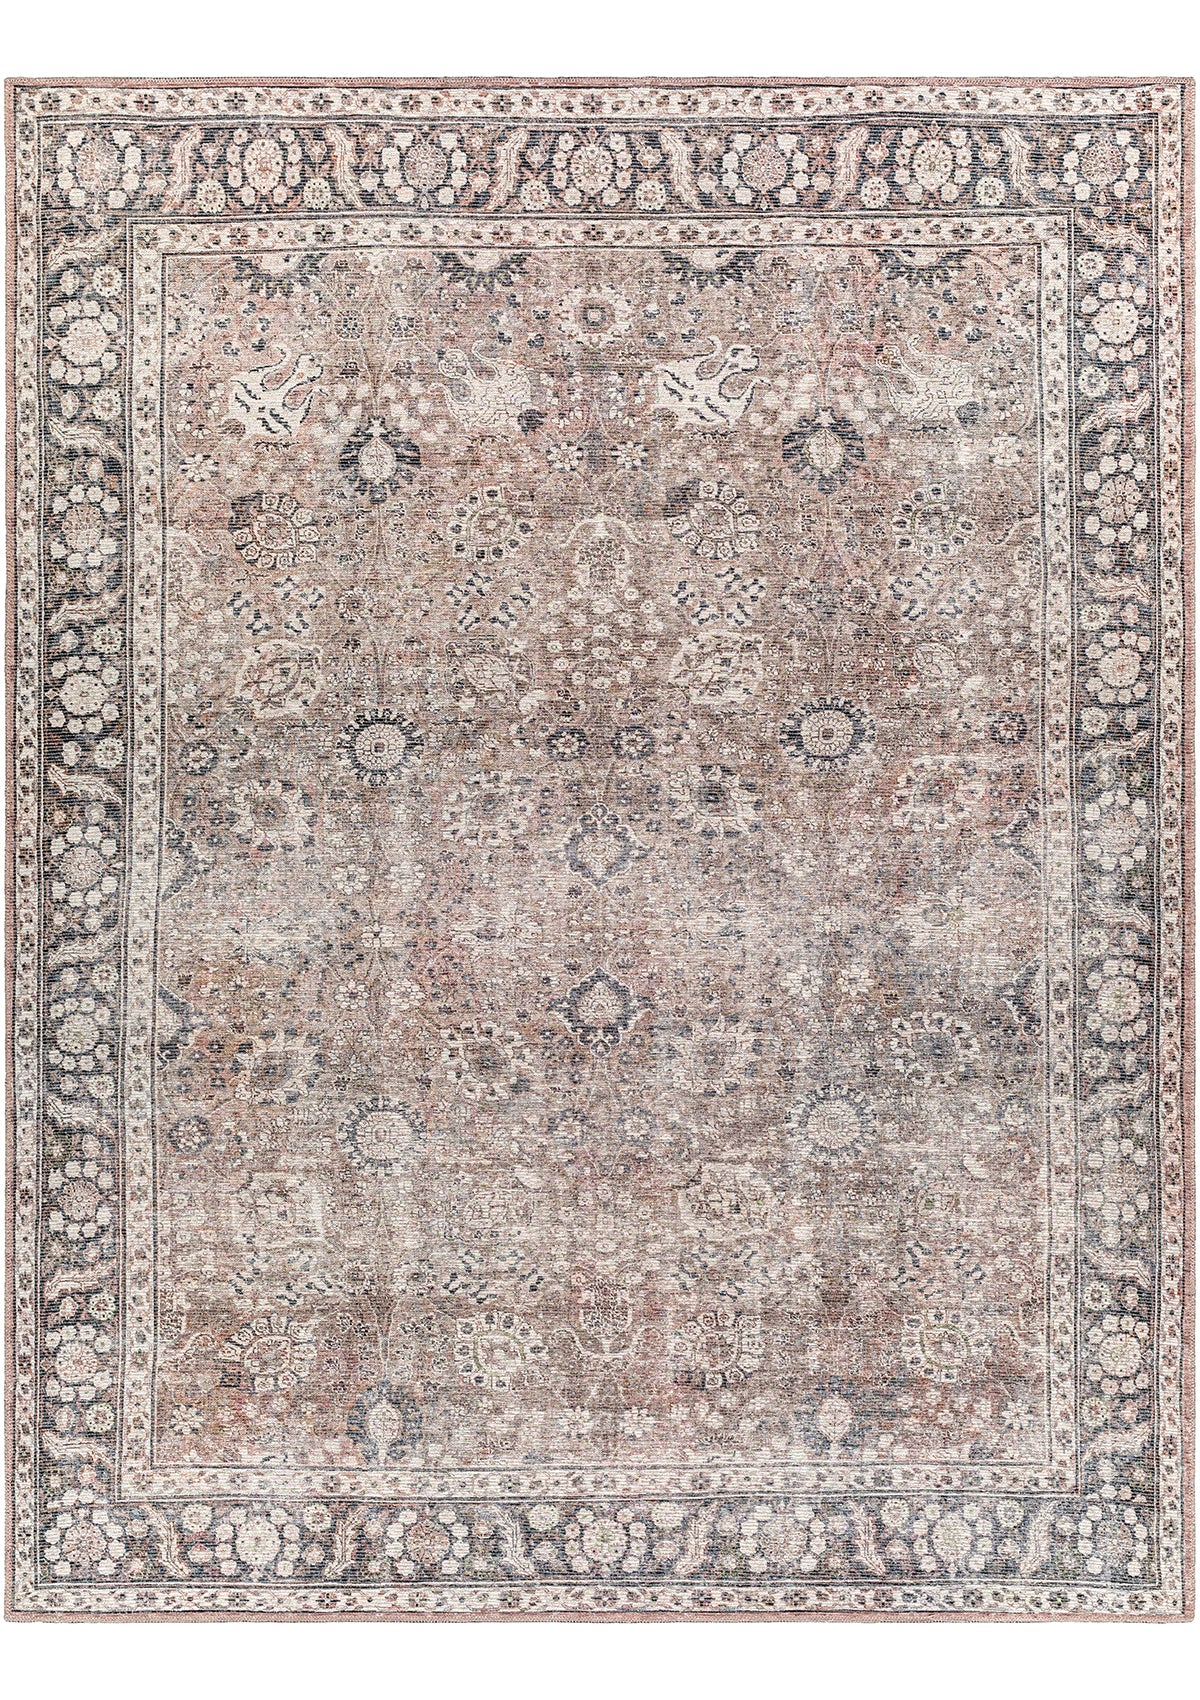 The Monet rug is machine washable which makes it the perfect rug for high traffic areas of the house.